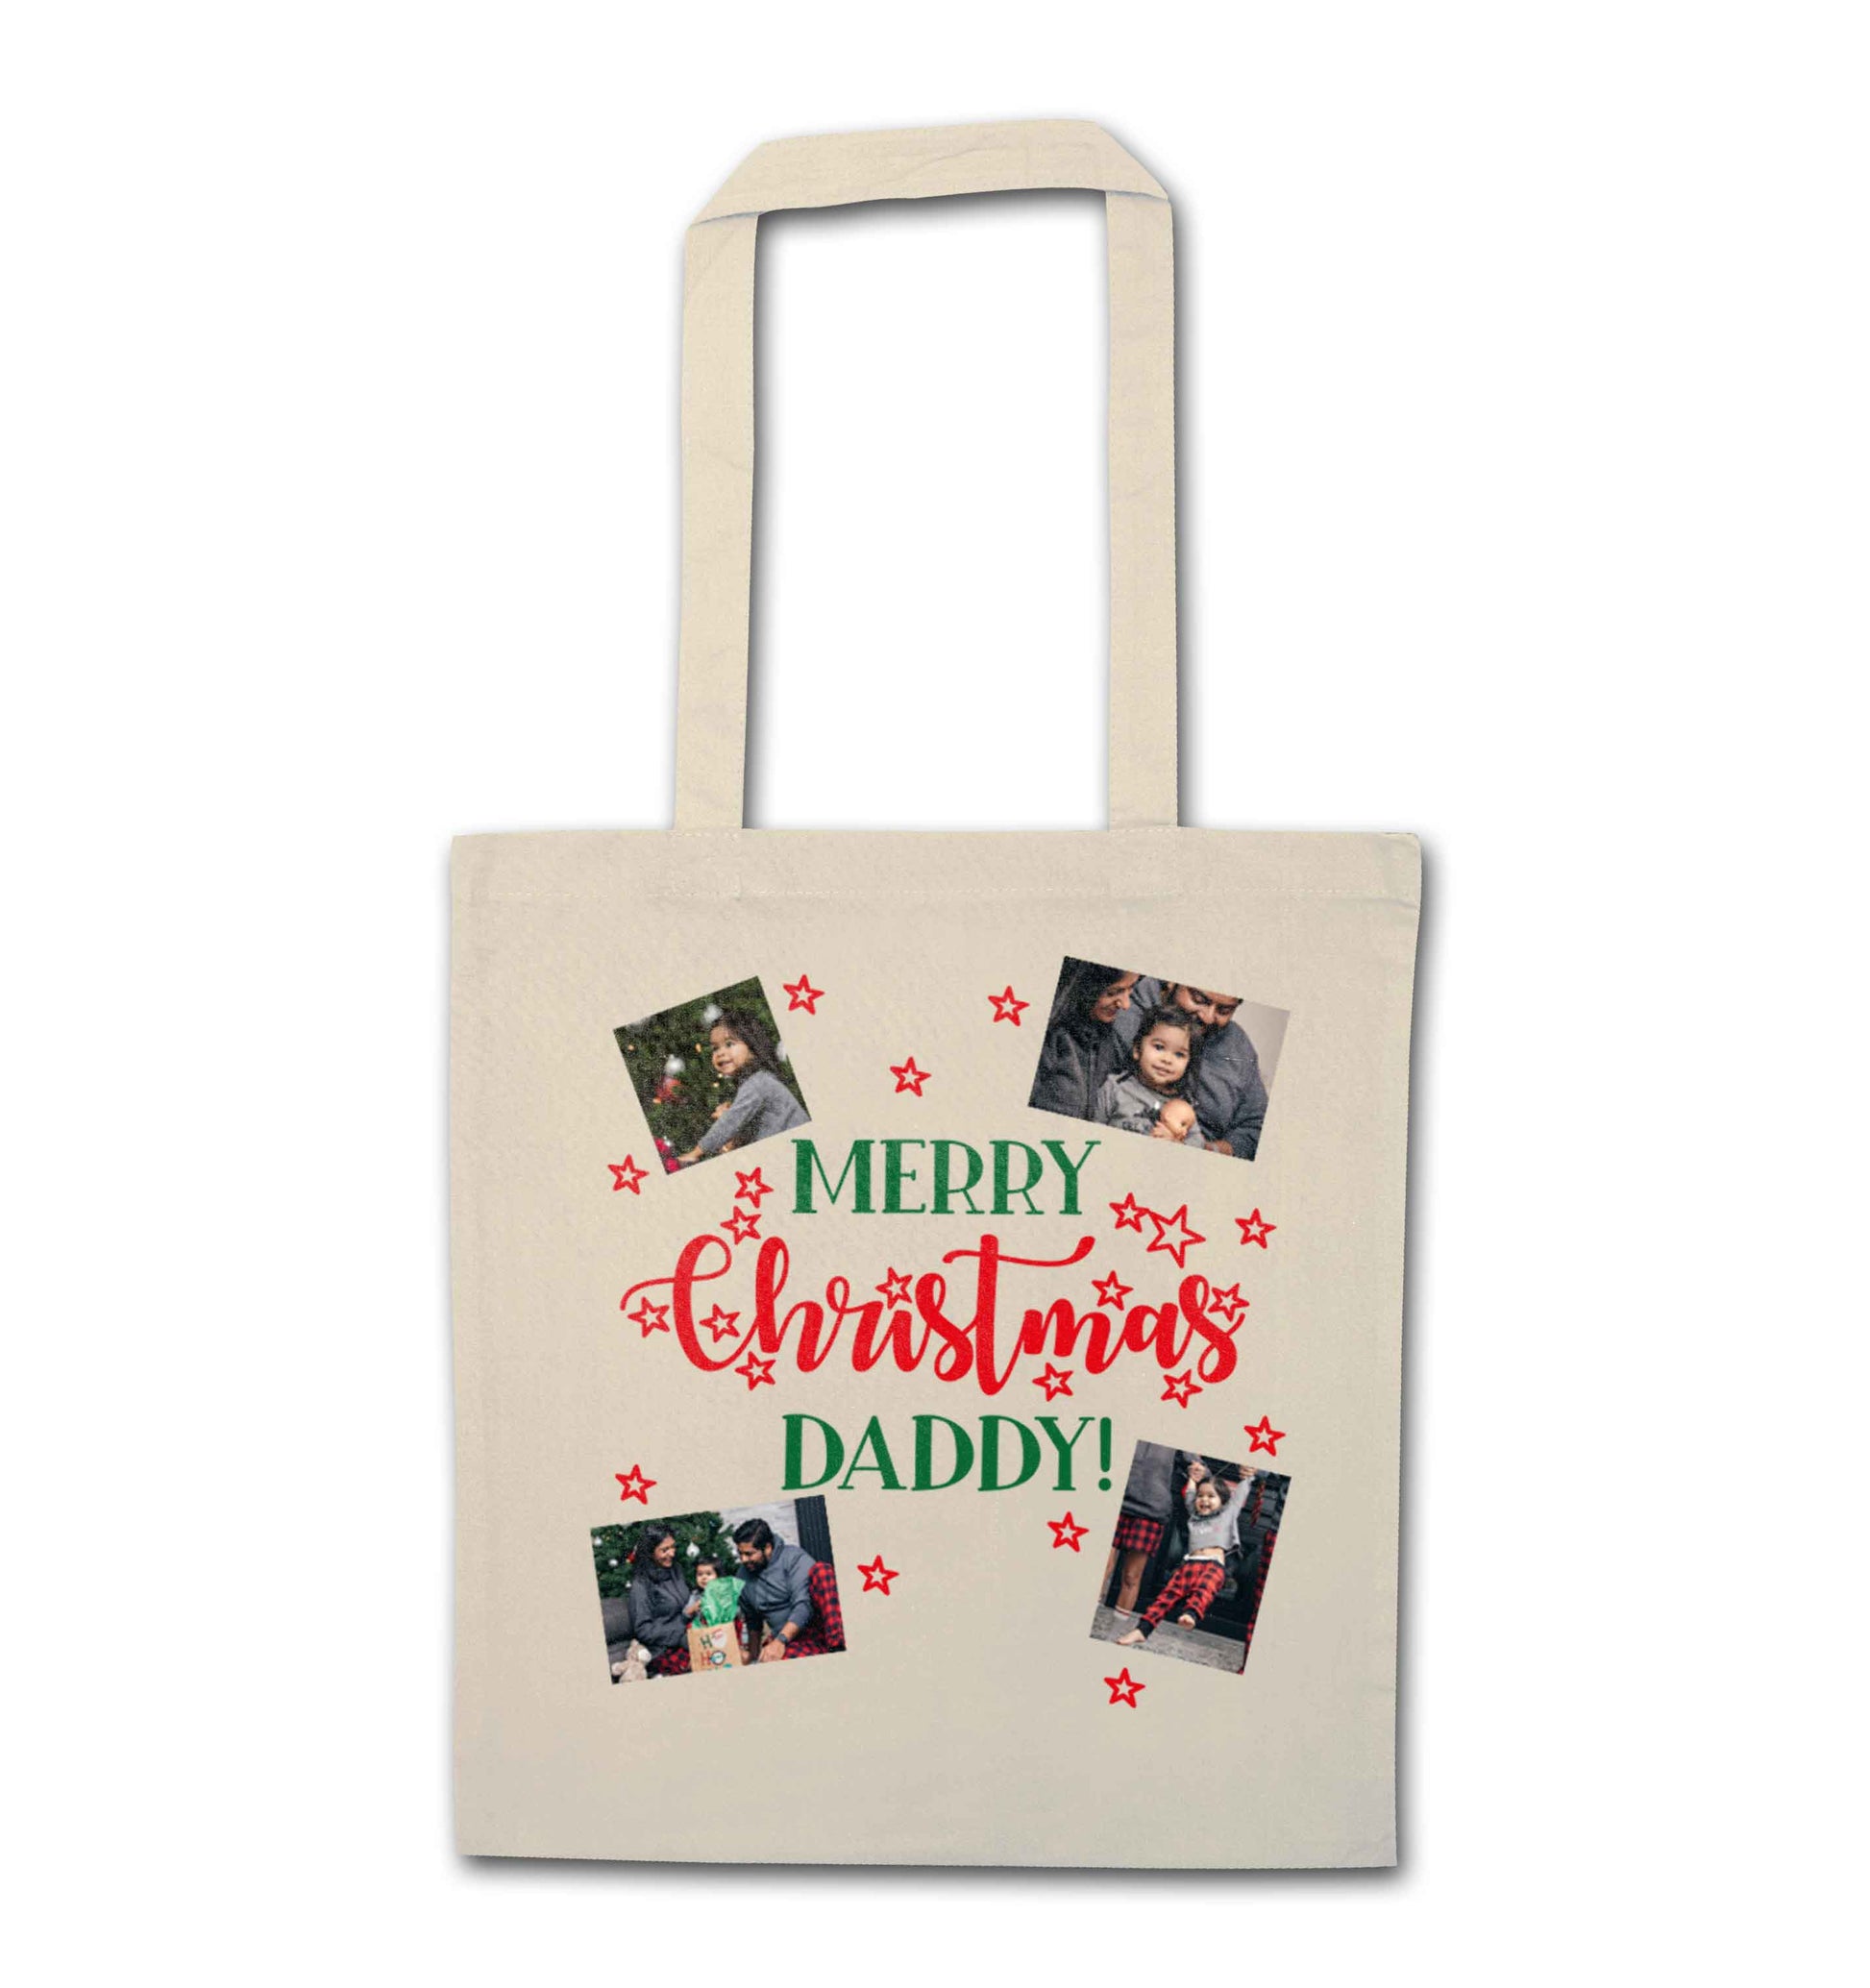 Merry Christmas daddy natural tote bag